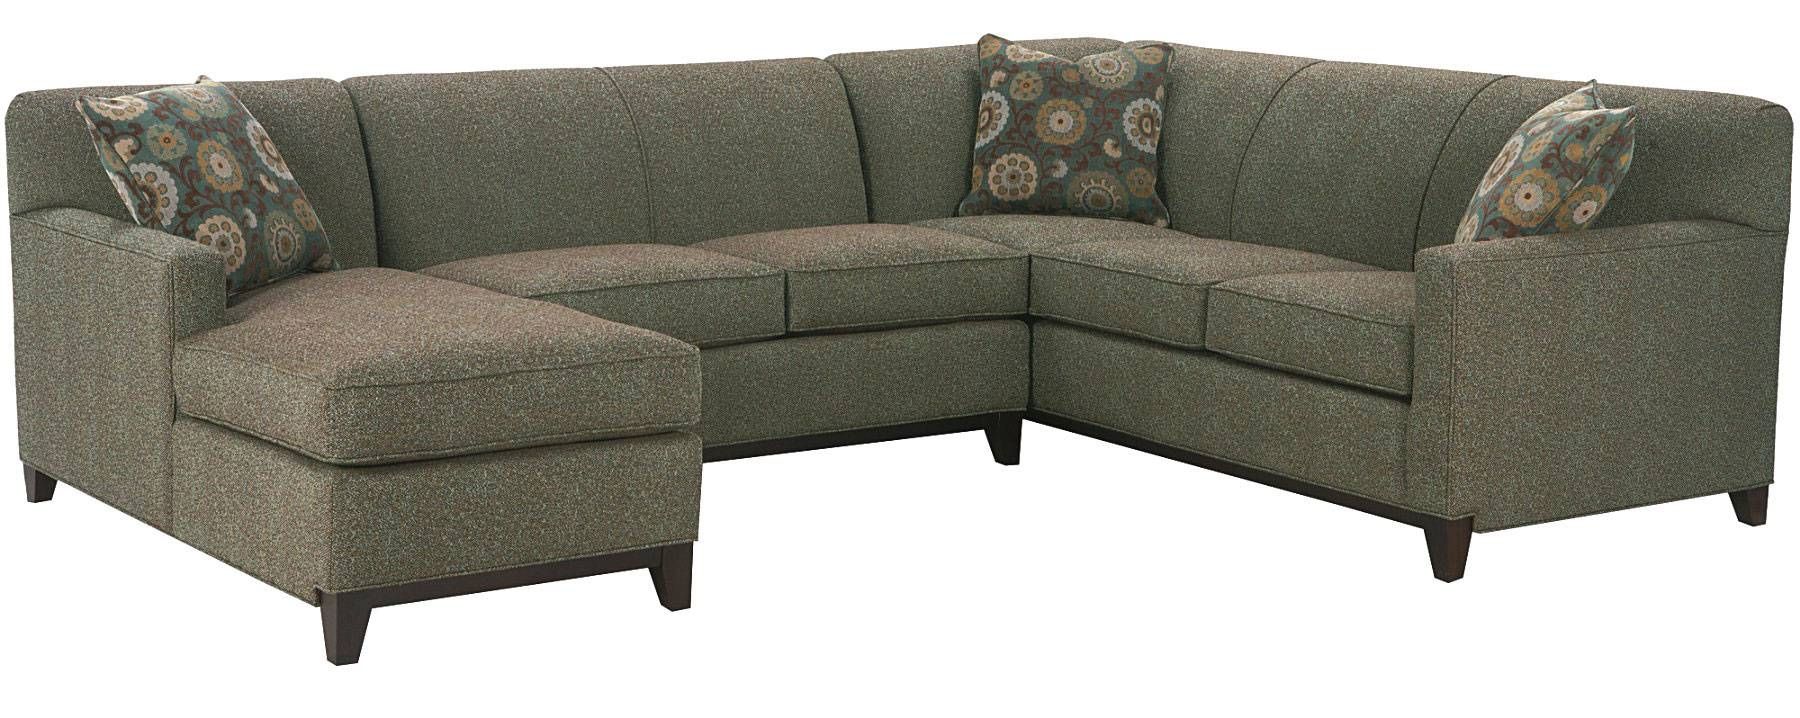 Sofas Center : Singular Build Your Ownfa Pictures Design Sectional In Building A Sectional Sofa (View 15 of 30)